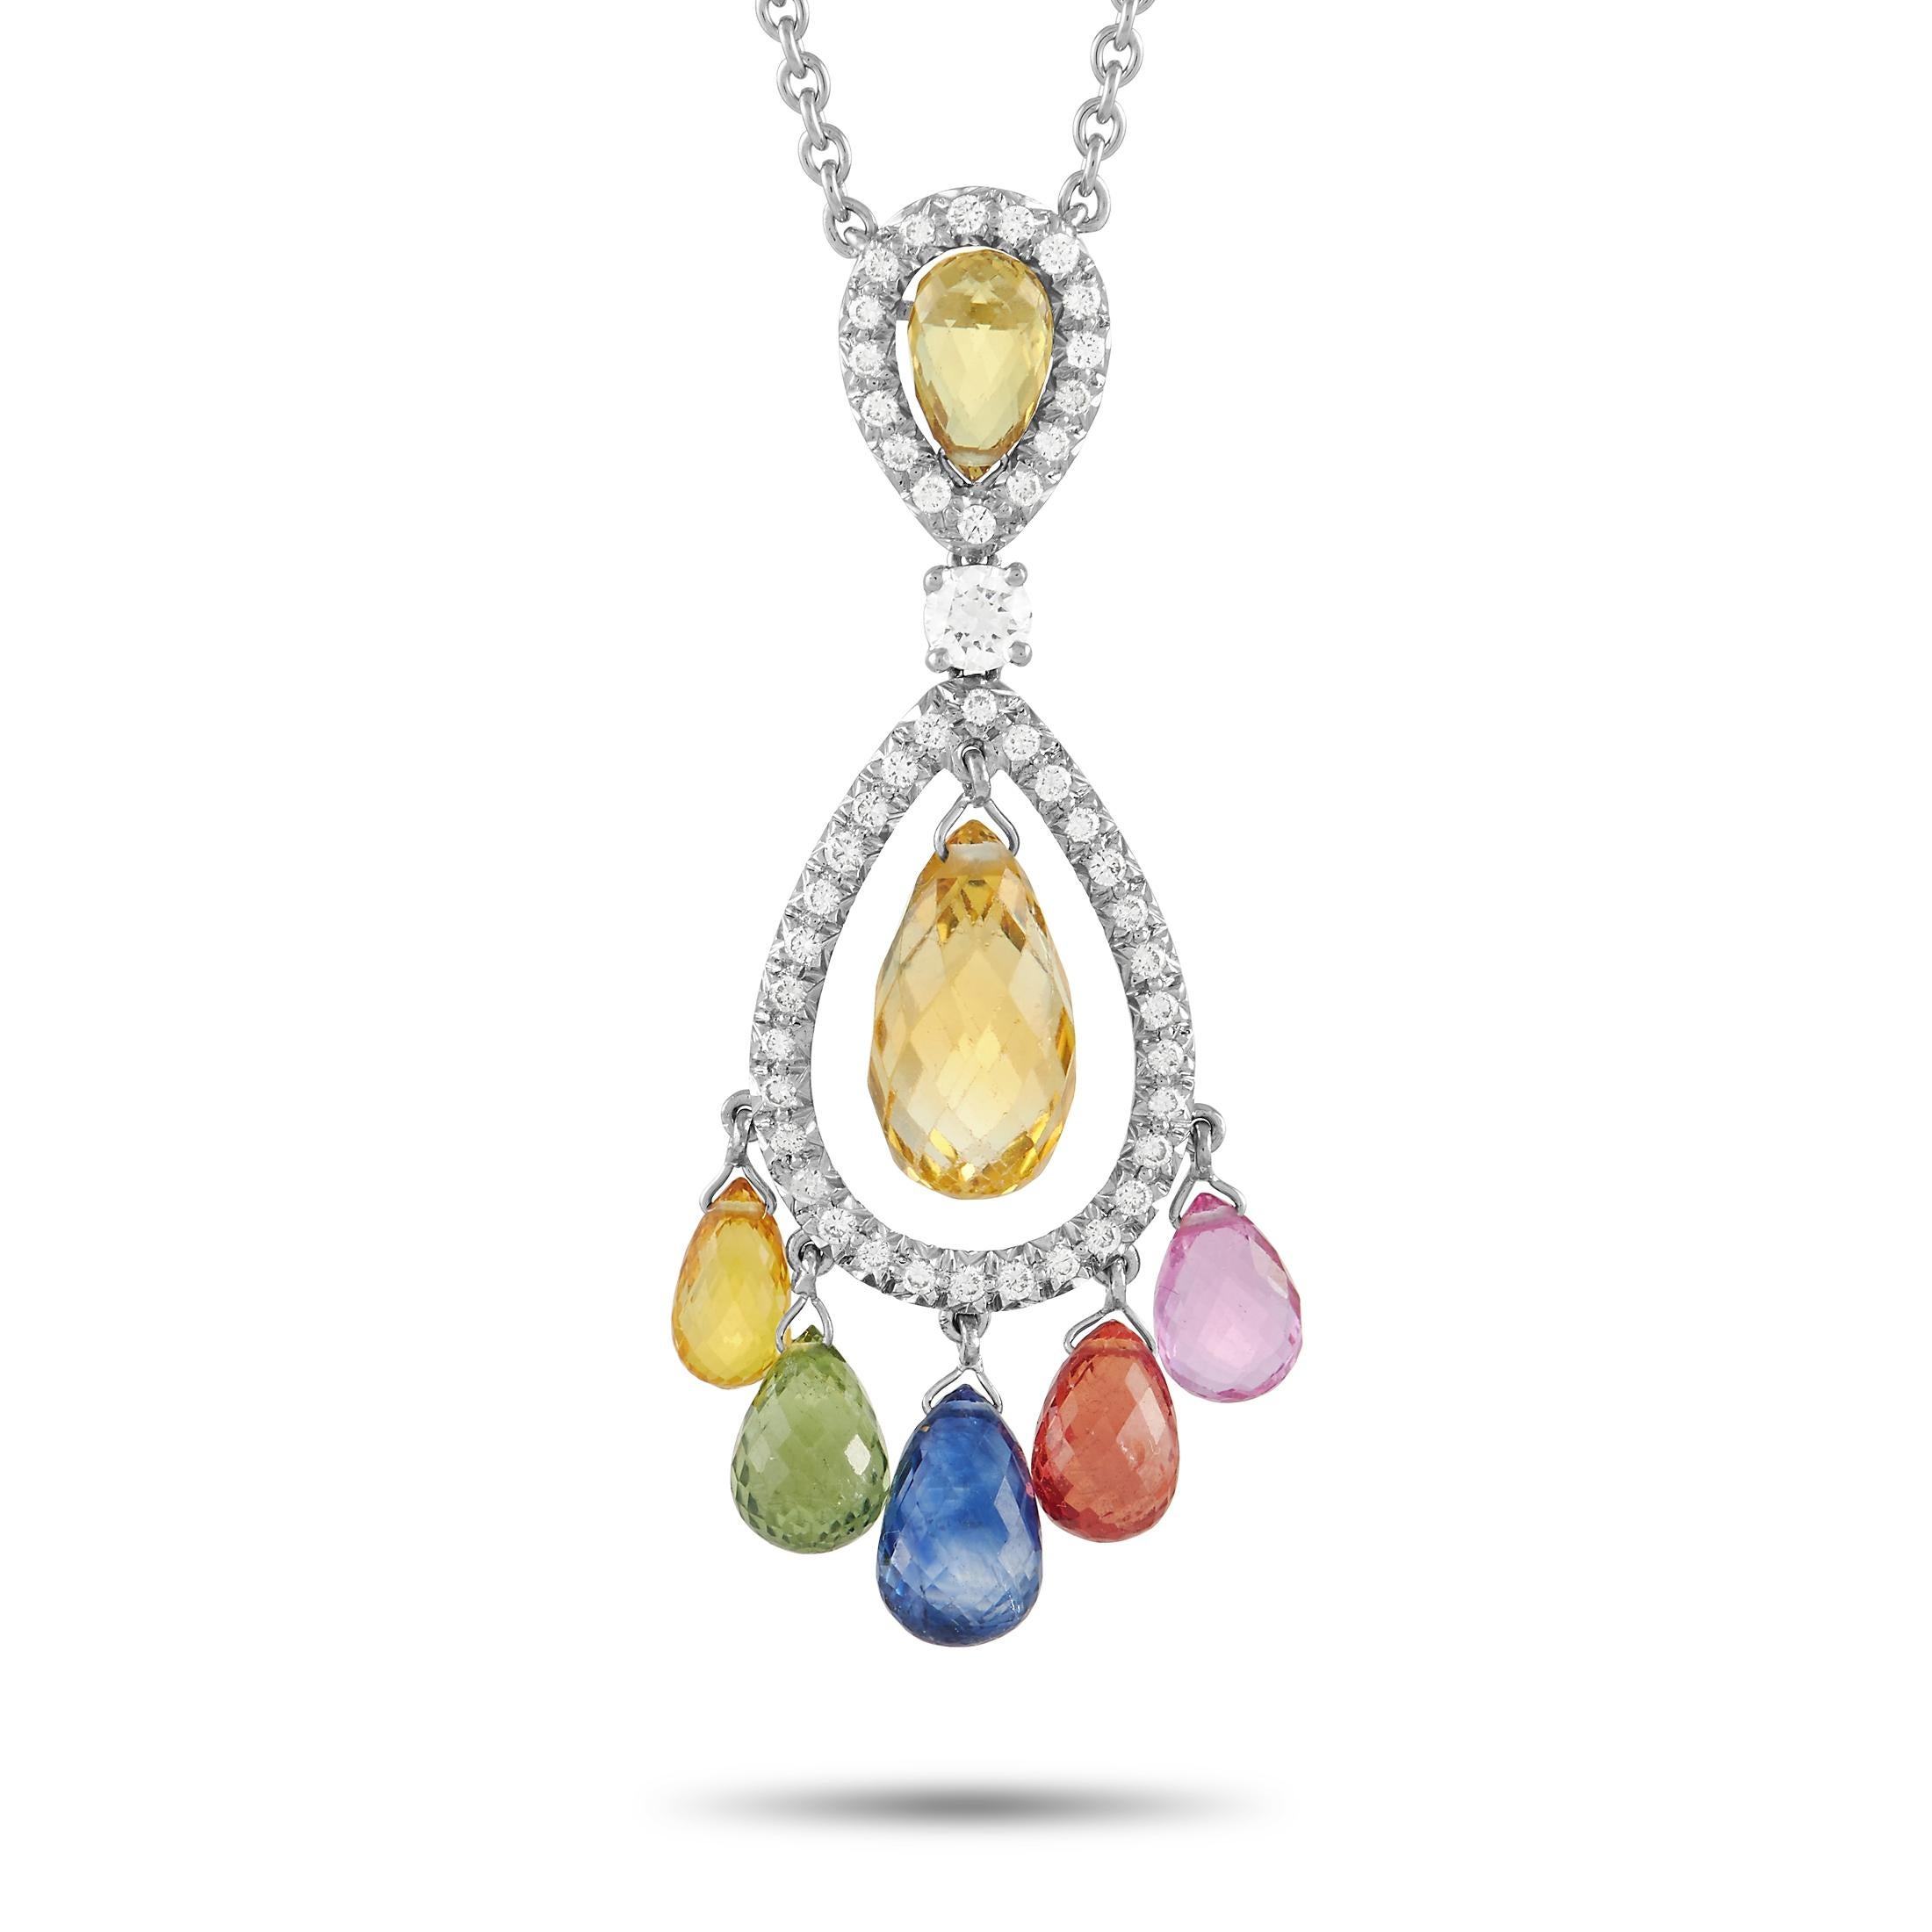 This vibrant Graff necklace and earring set is full of personality. The necklace pendant is made from 18K white gold and set with an estimated 1.75 carats of brilliant round diamonds over its face outlining an estimated 6.50 carats of multi-colored